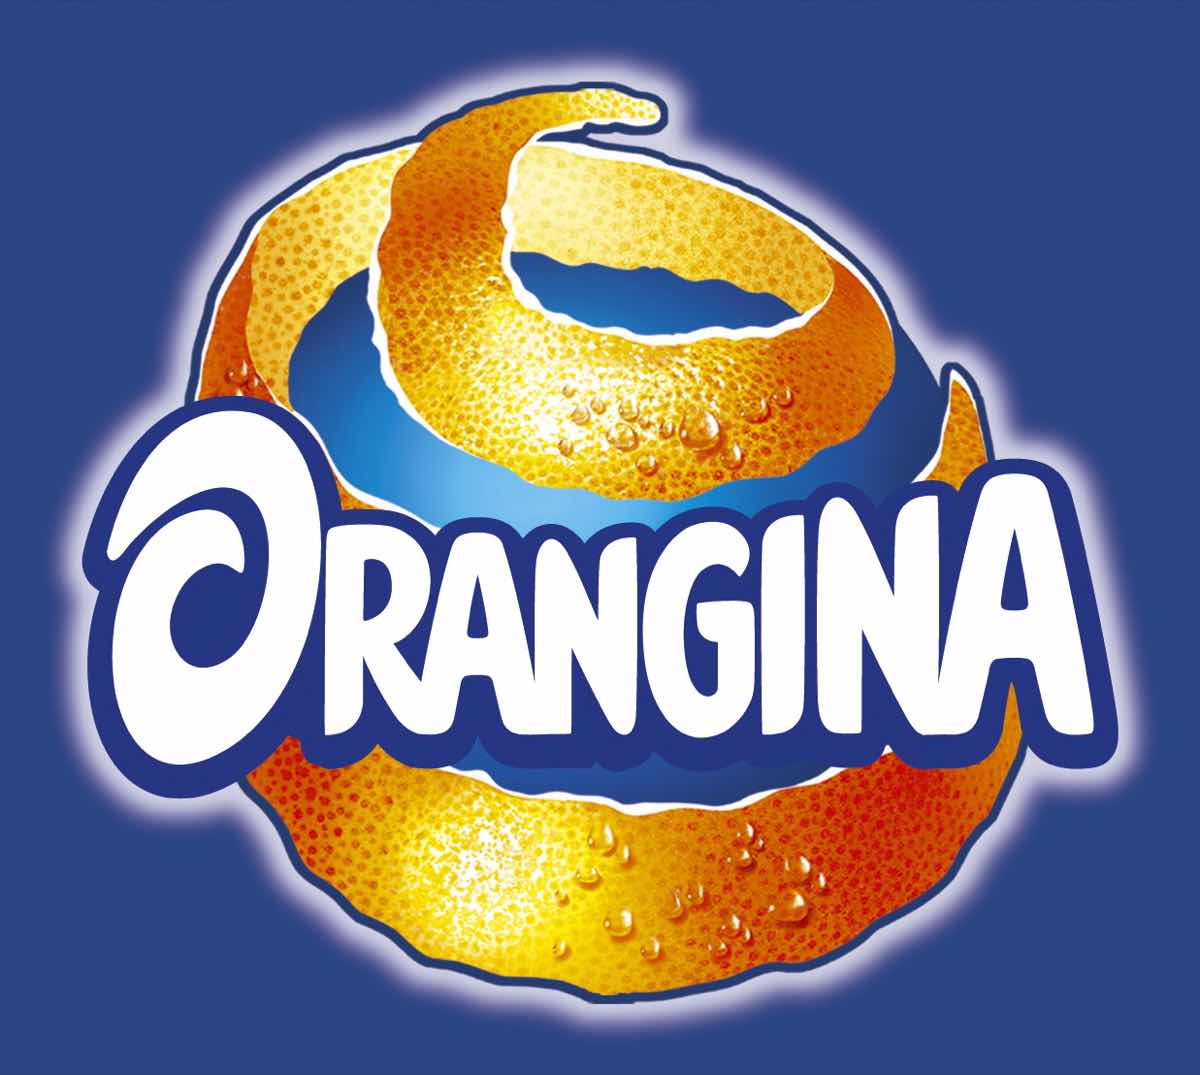 Vietnamese firm to produce and distribute Orangina